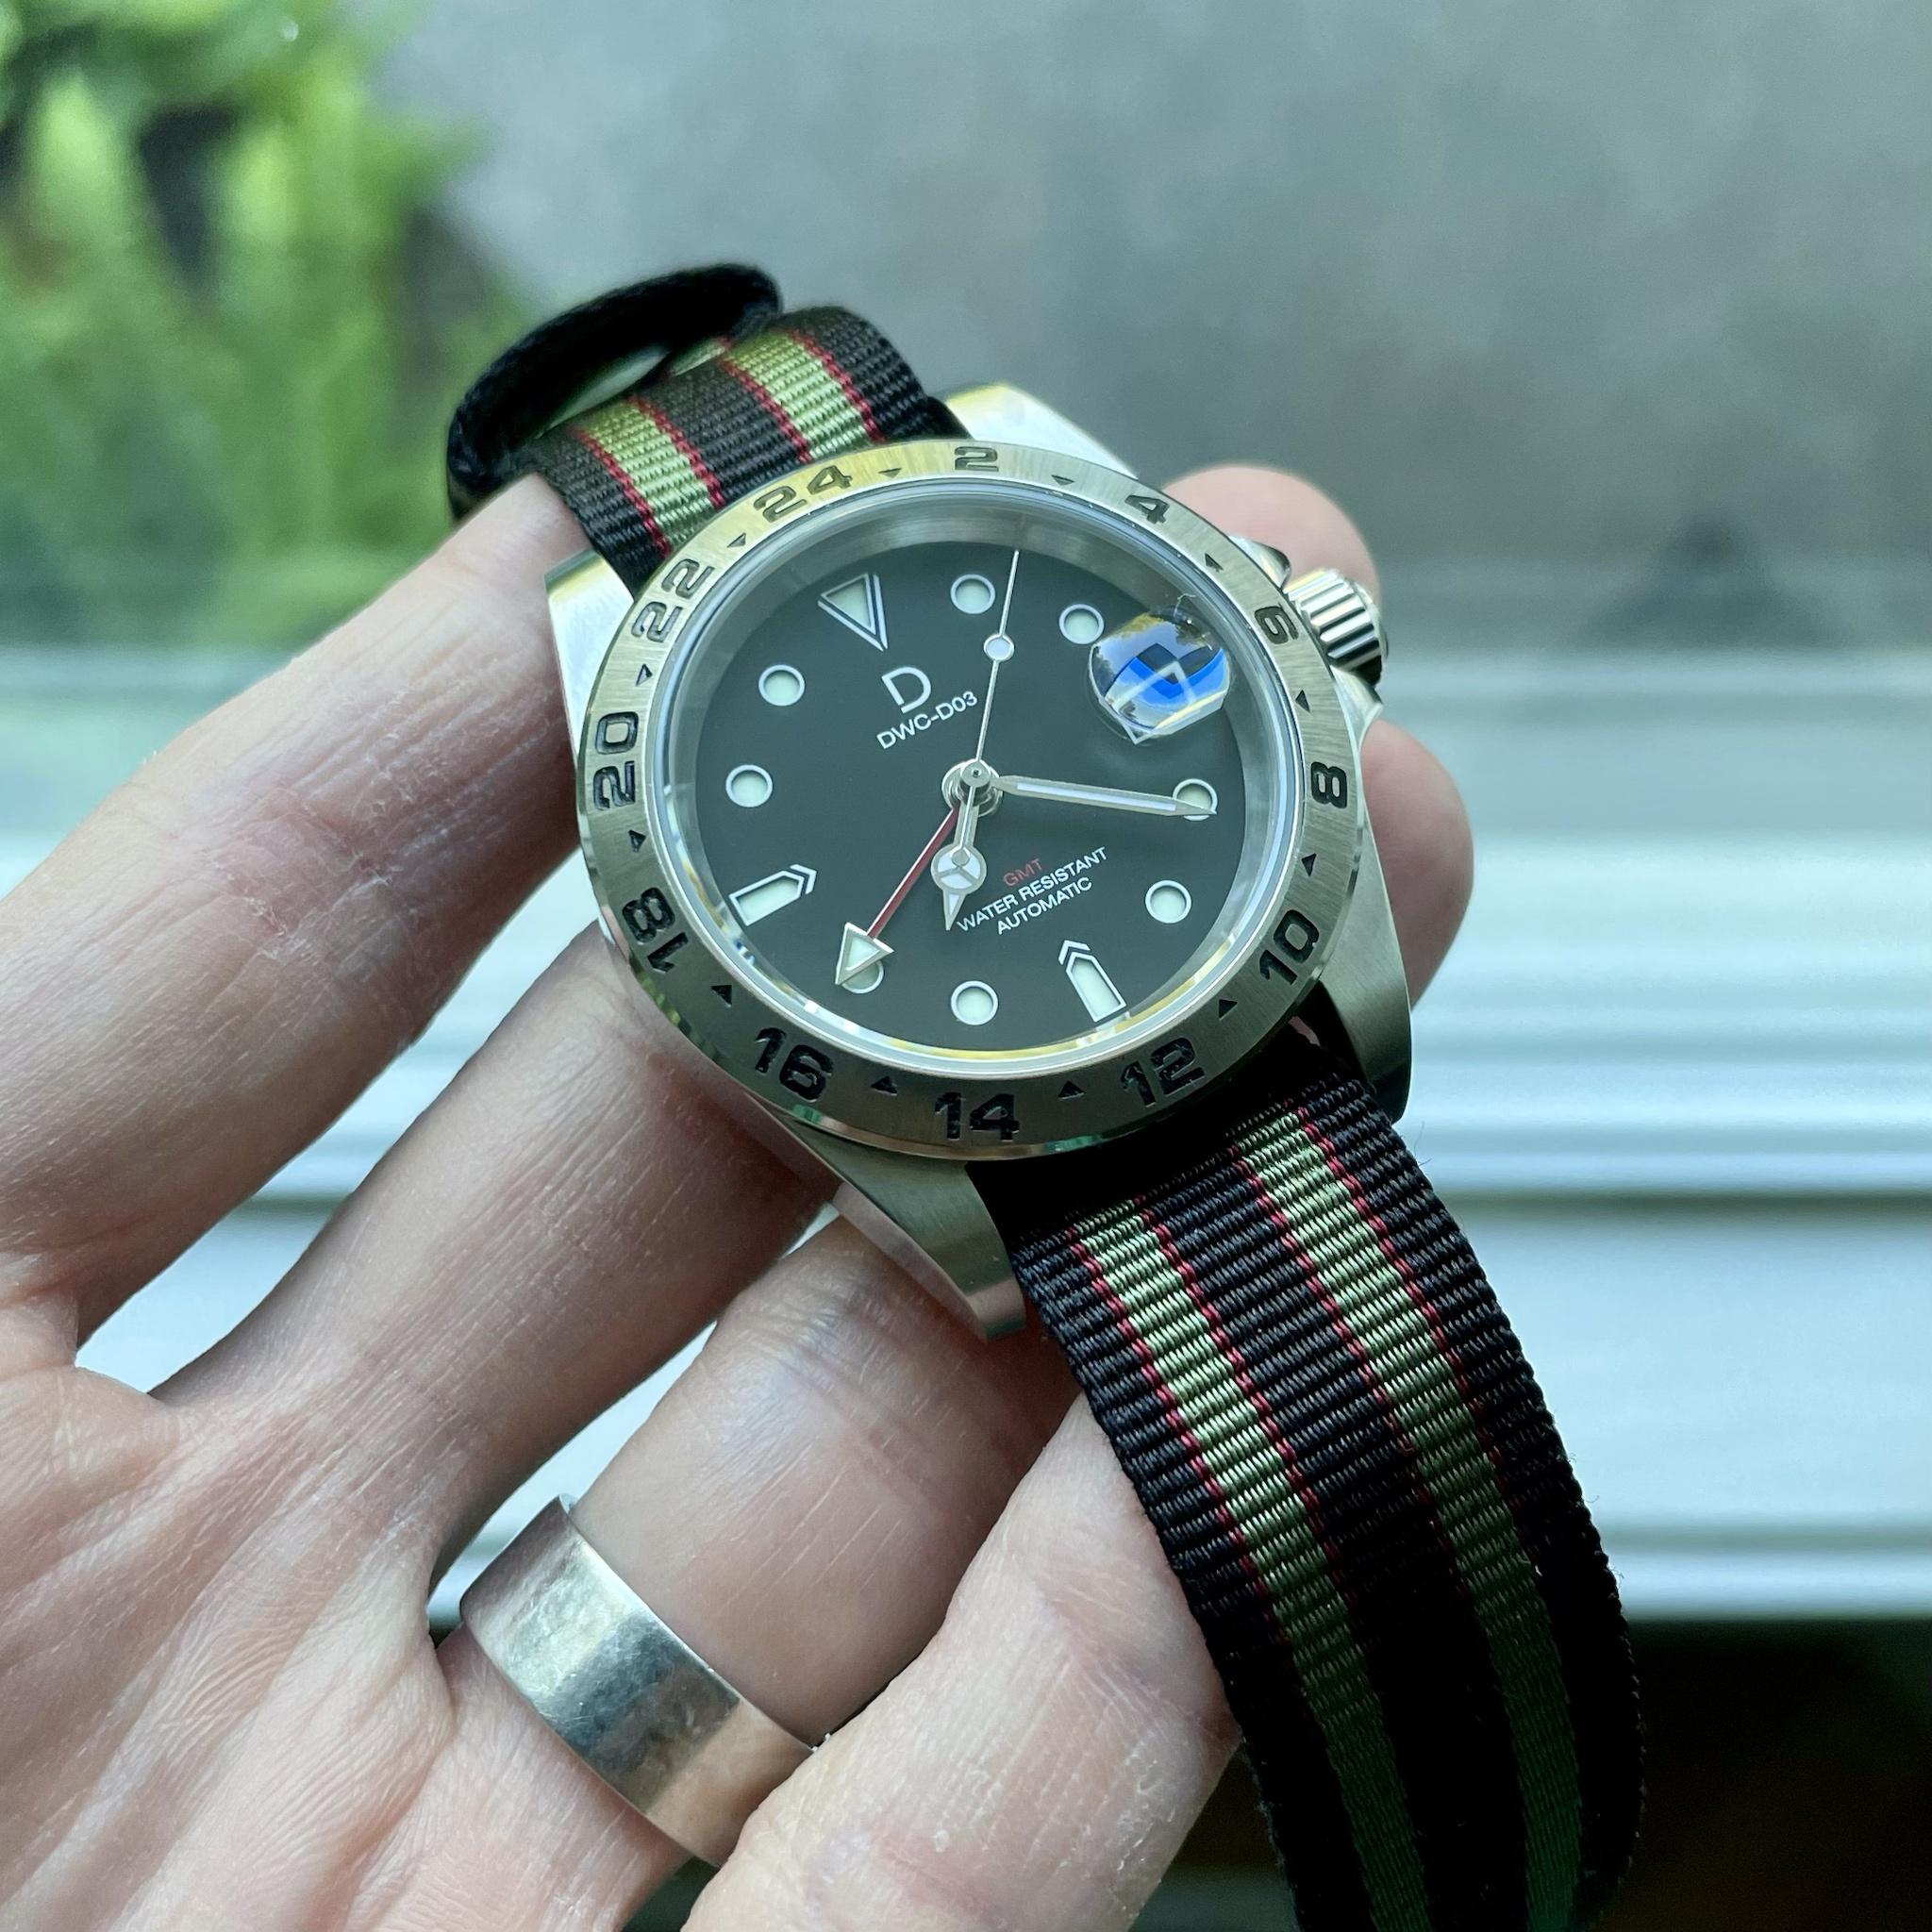 165 USD] For Sale: 39mm GMT Mod, Explorer II Style - Seiko NH34 